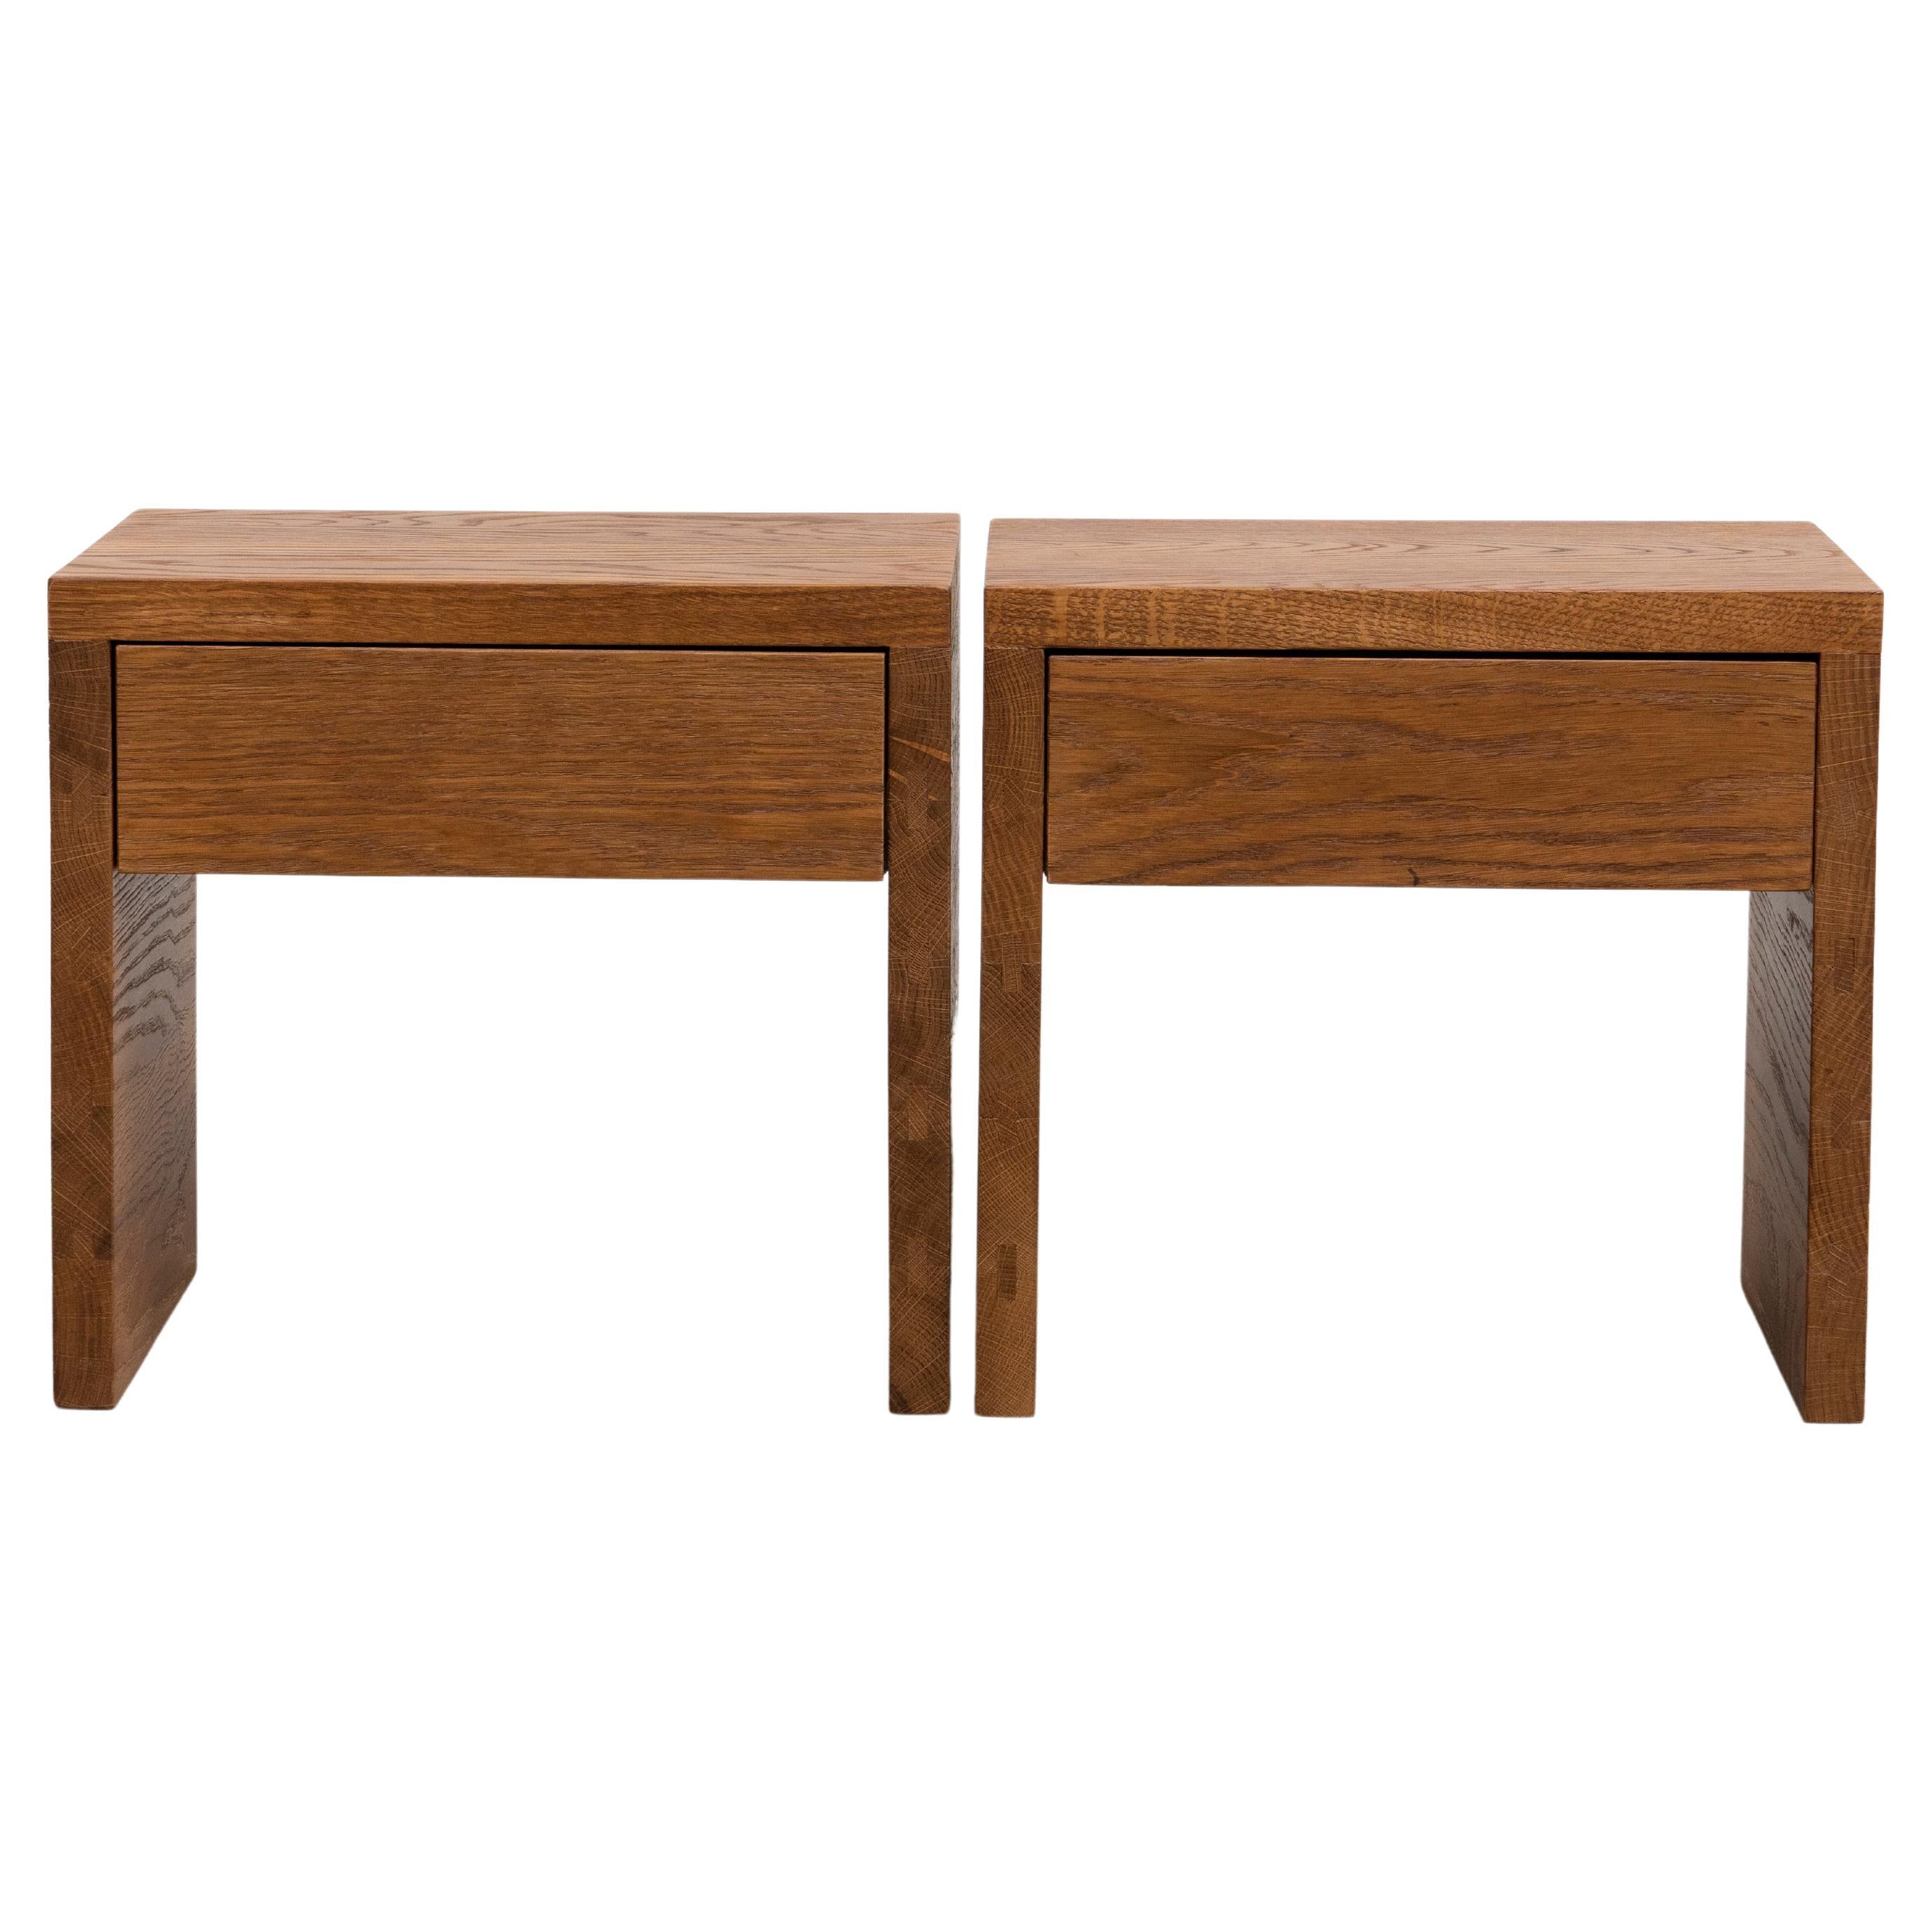 Set of 2 Drawer Solid Wood Night Stands by Dada Est For Sale